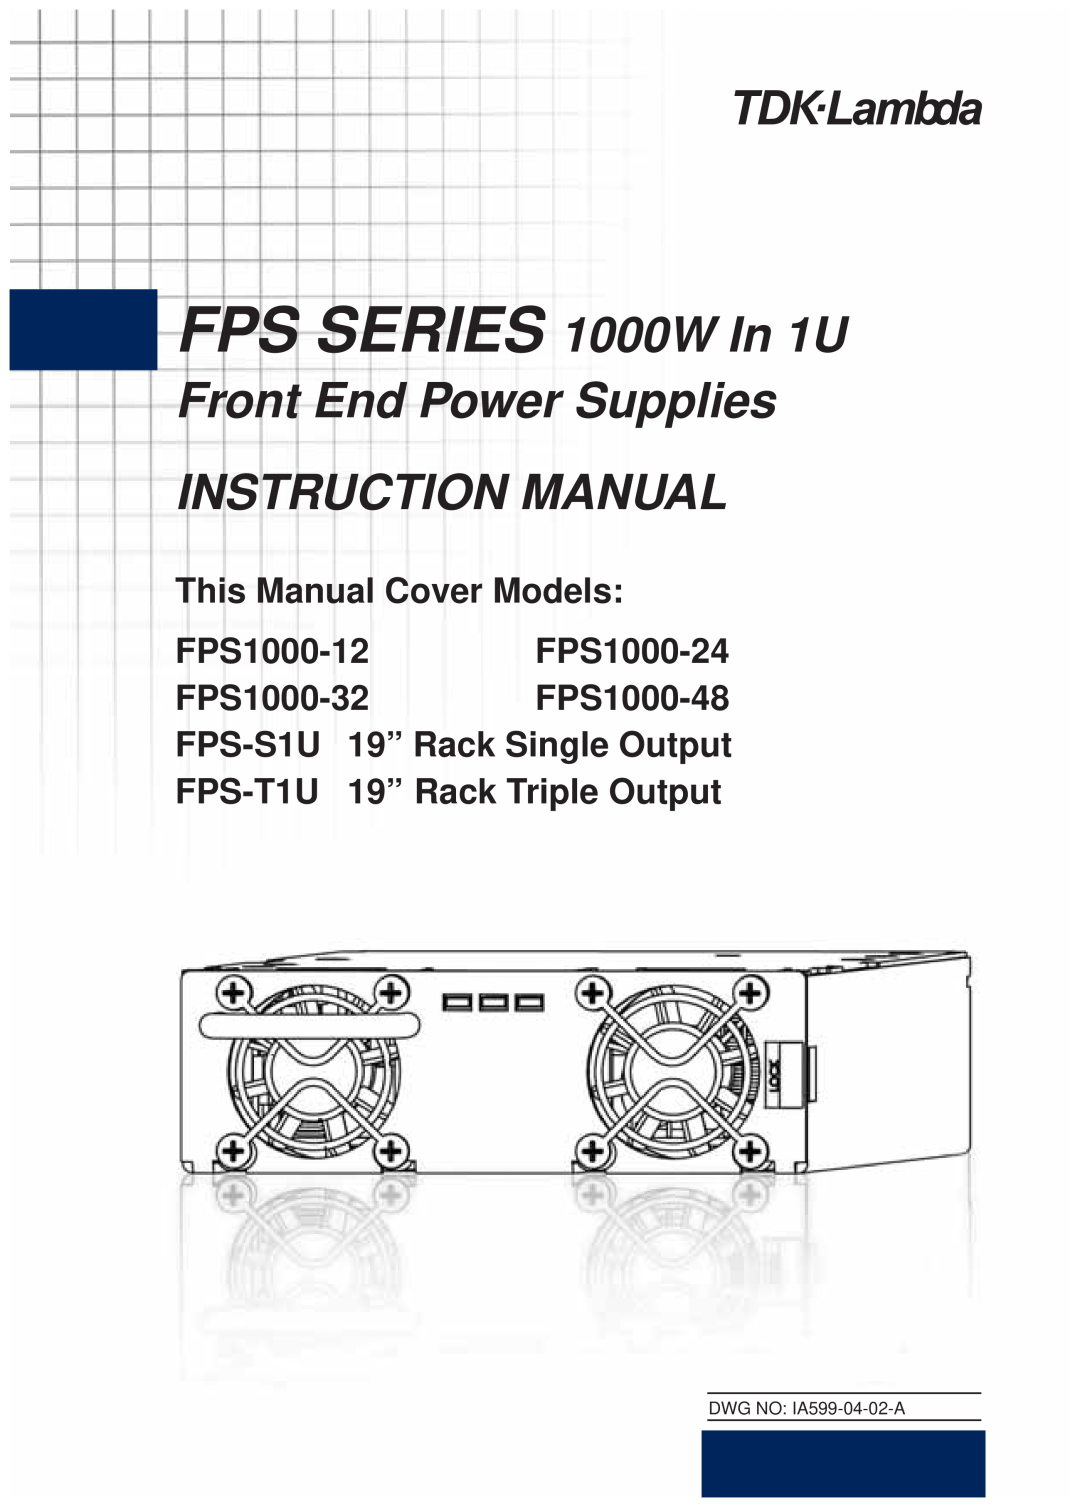 TOA Electronics FPS1000-12, FPS-S1U instruction manual FPS SERIES 1000W In 1U, Front End Power Supplies INSTRUCTION MANUAL 